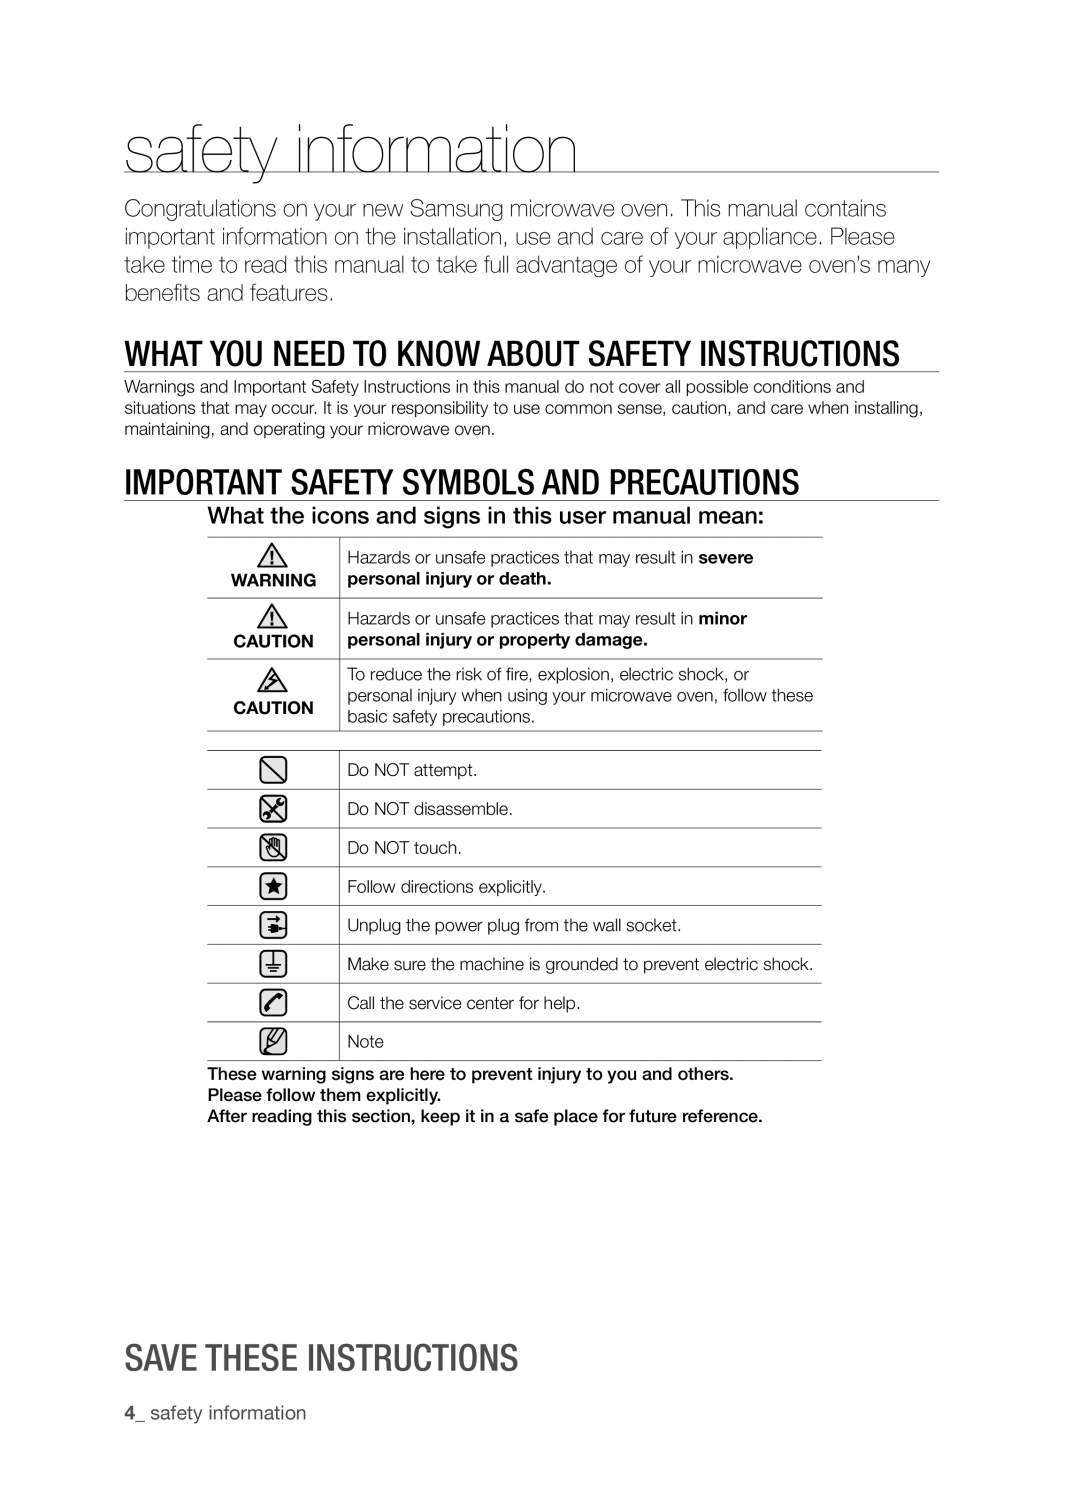 Samsung SMH8165STE user manual What you need to know about safety instructions, IMPORTANT safety symbols and precautions 